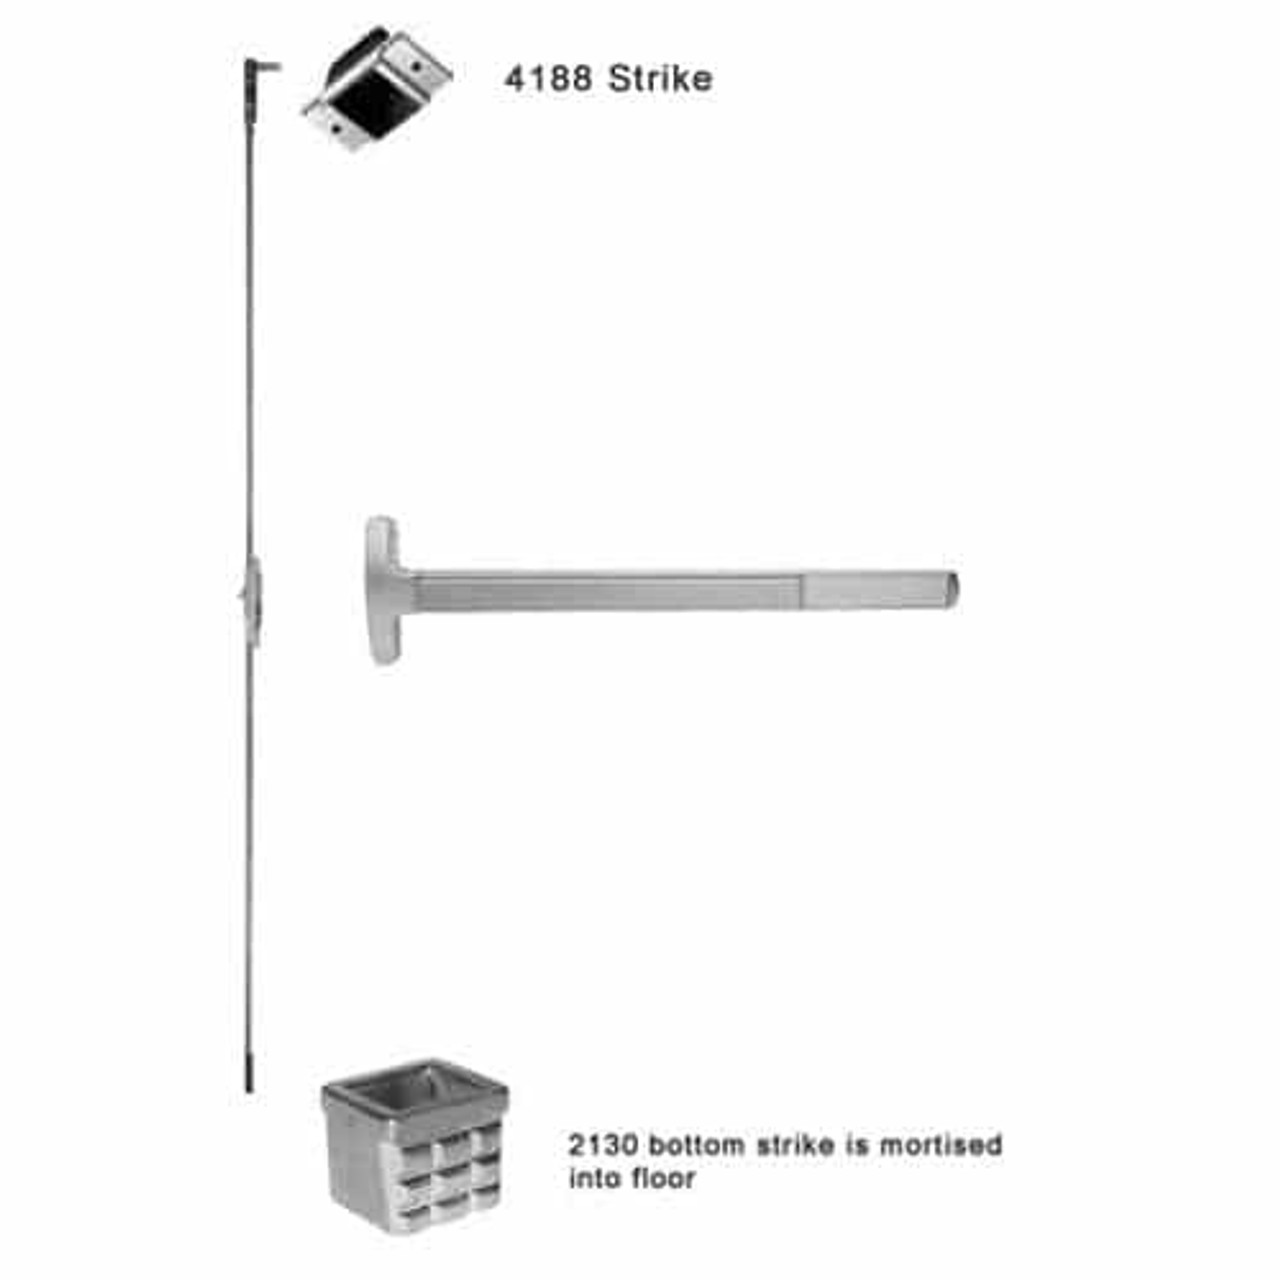 F-24-C-L-DT-DANE-US15-2-RHR Falcon 24 Series Fire Rated Concealed Vertical Rod Device 712L-DT Dane Lever with Dummy Trim in Satin Nickel